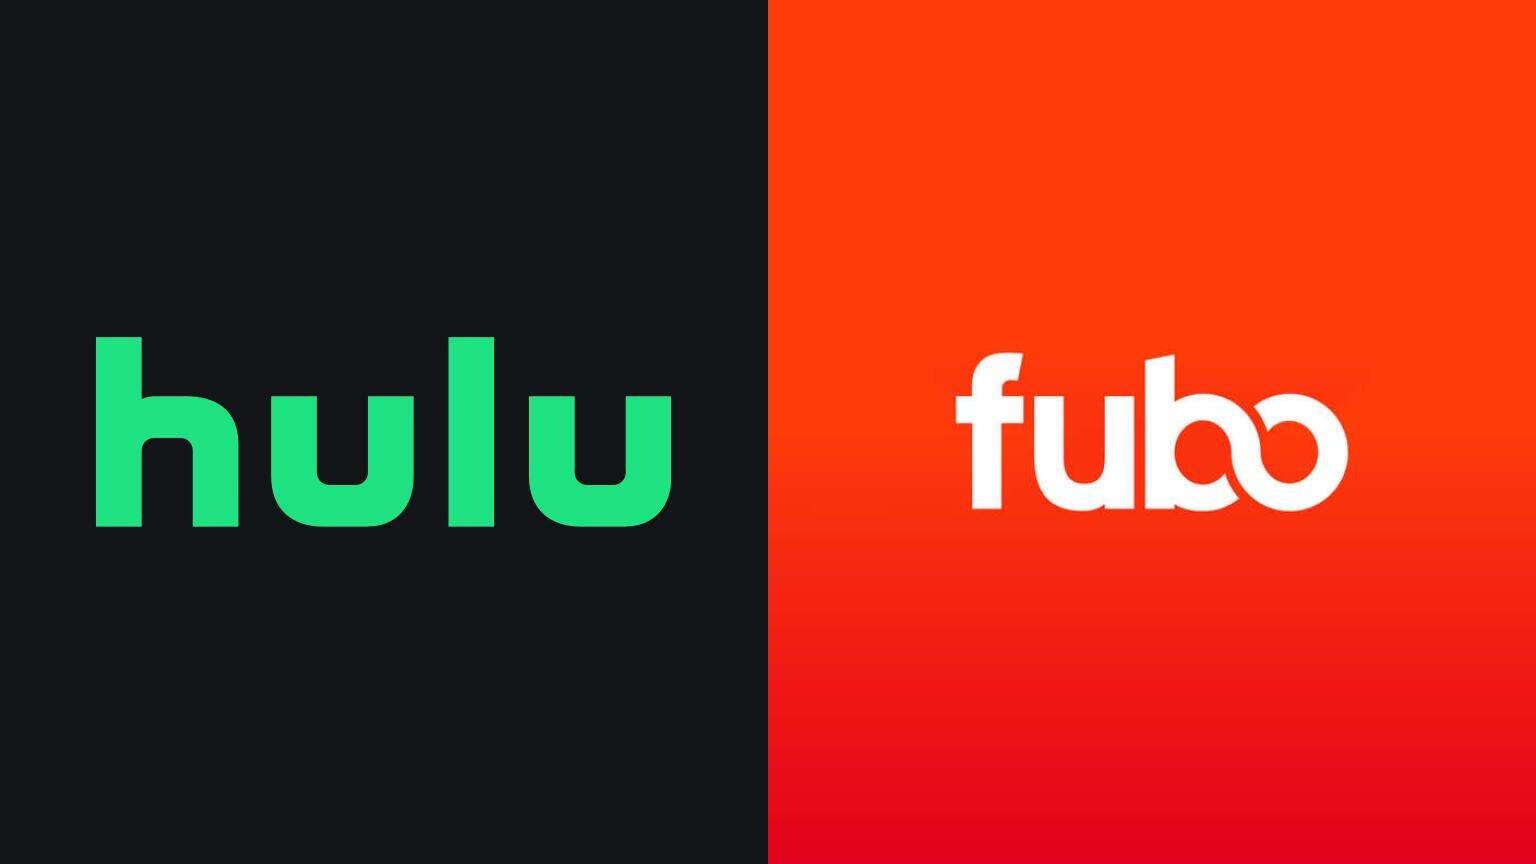 Hulu Live TV vs. Fubo Which Should You Choose? The Streamable